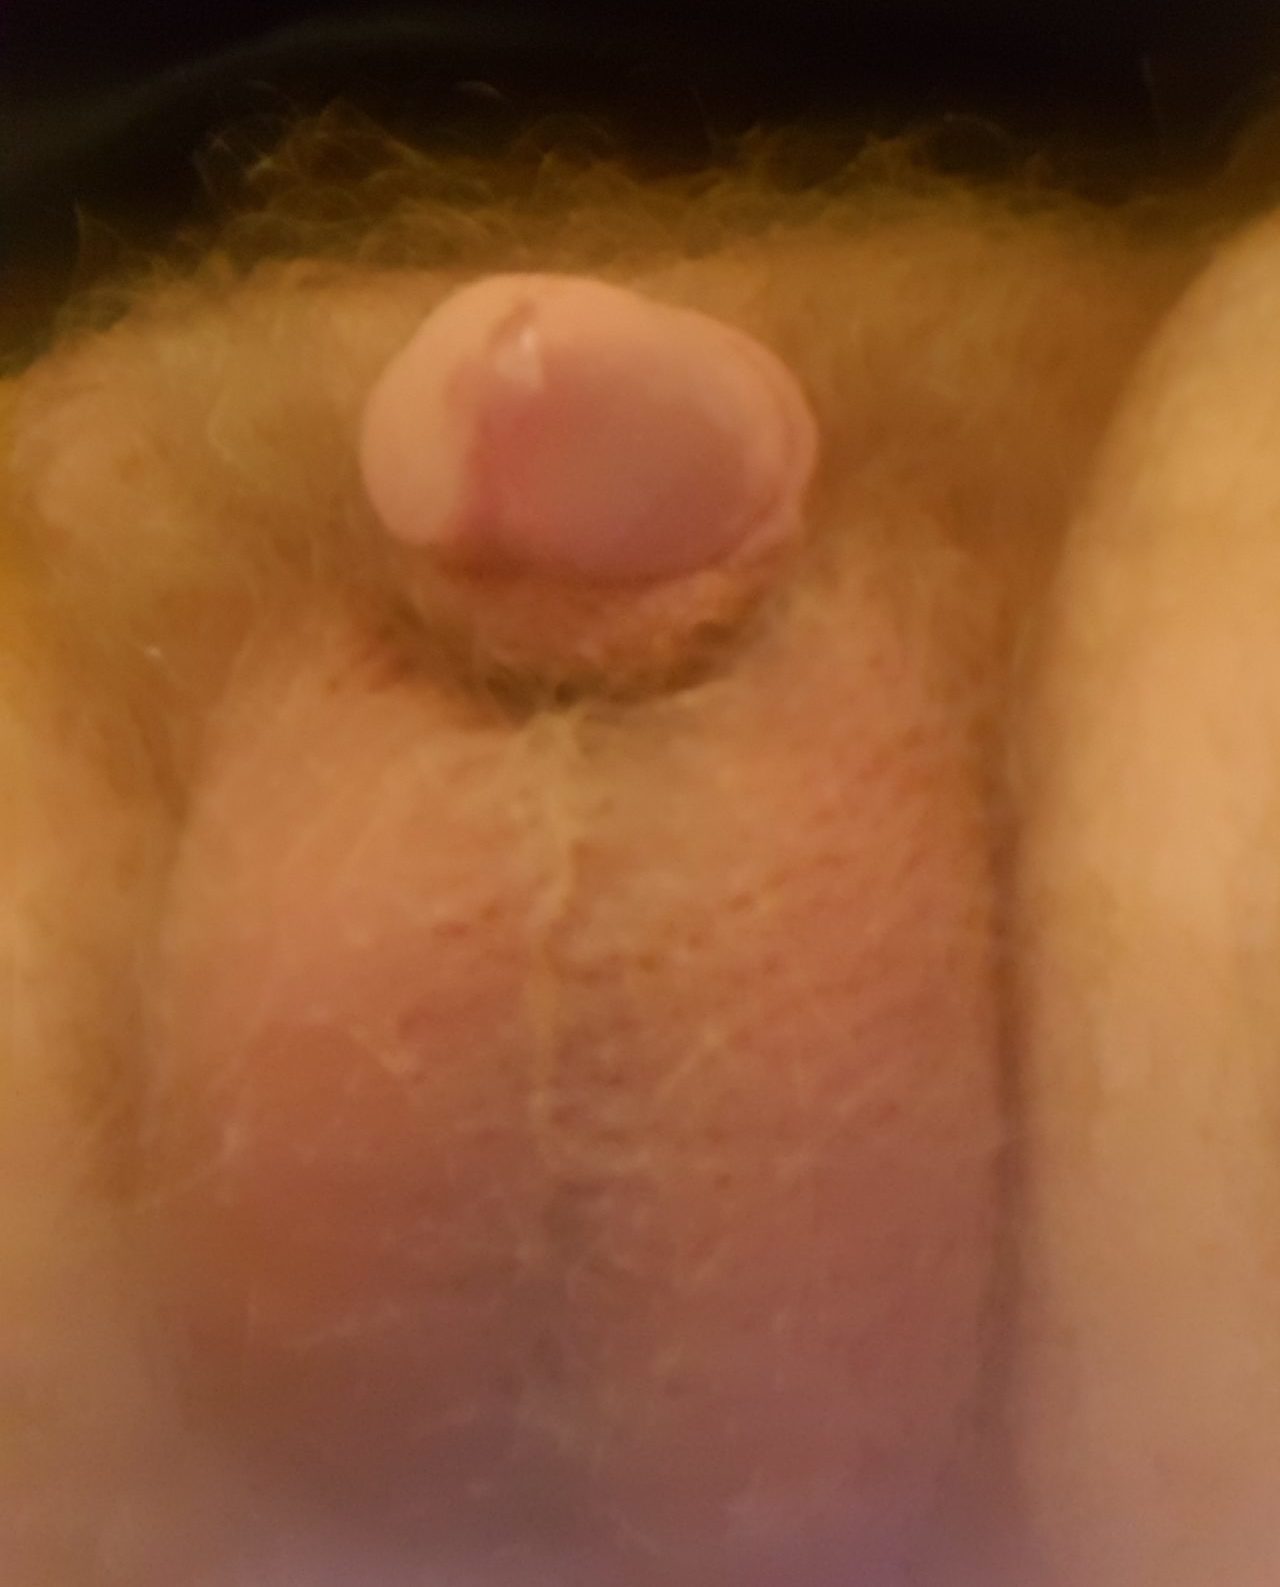 Showing off his pathetic penis